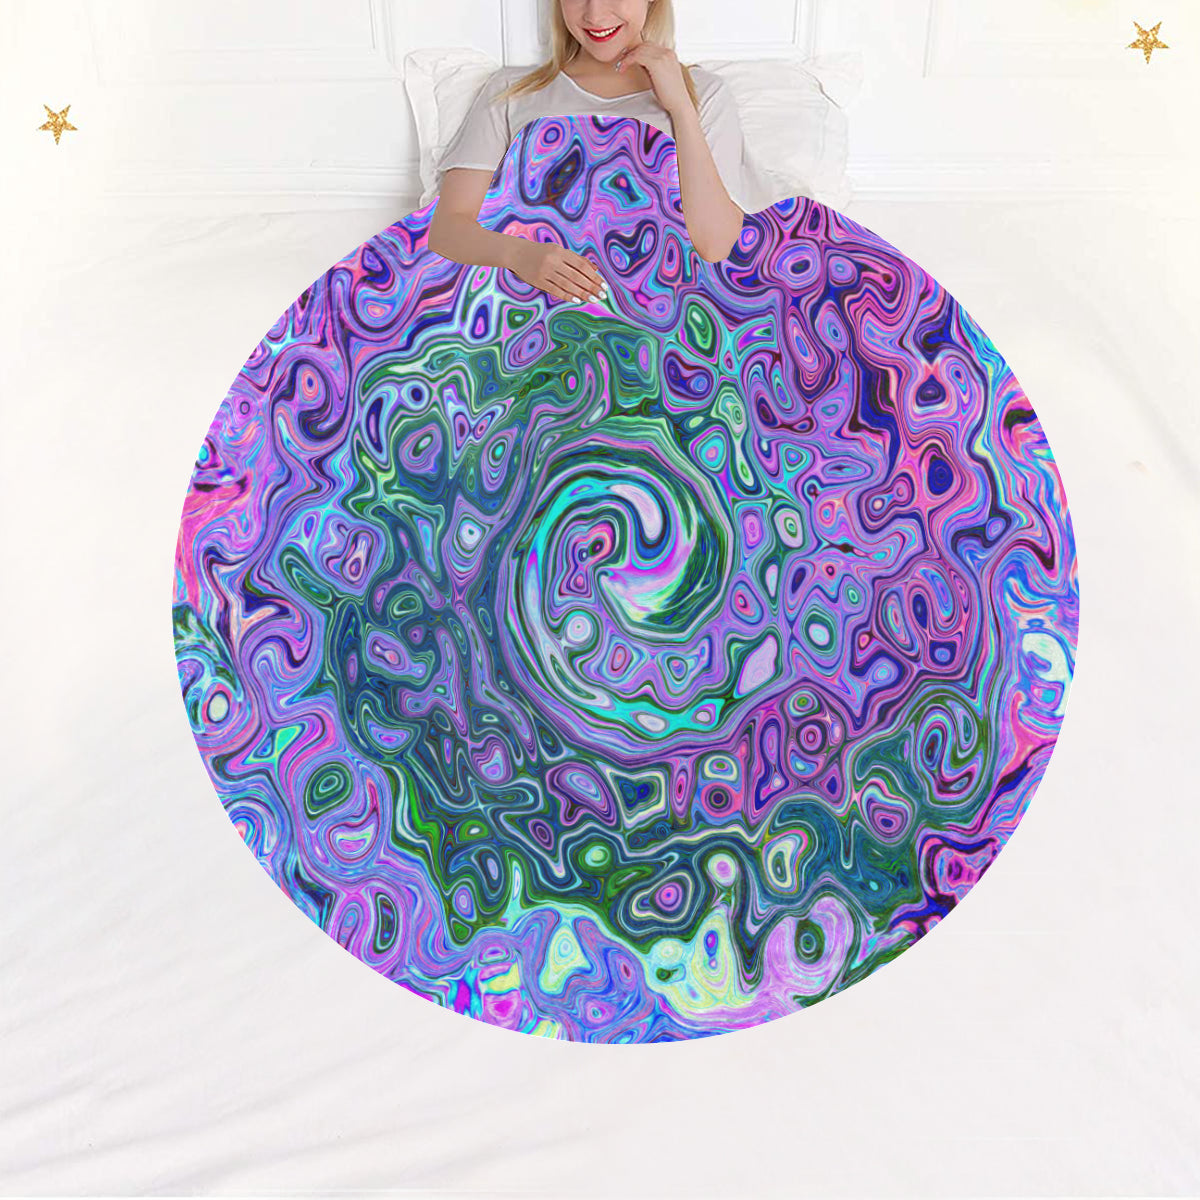 Round Throw Blankets, Groovy Abstract Retro Green and Purple Swirl